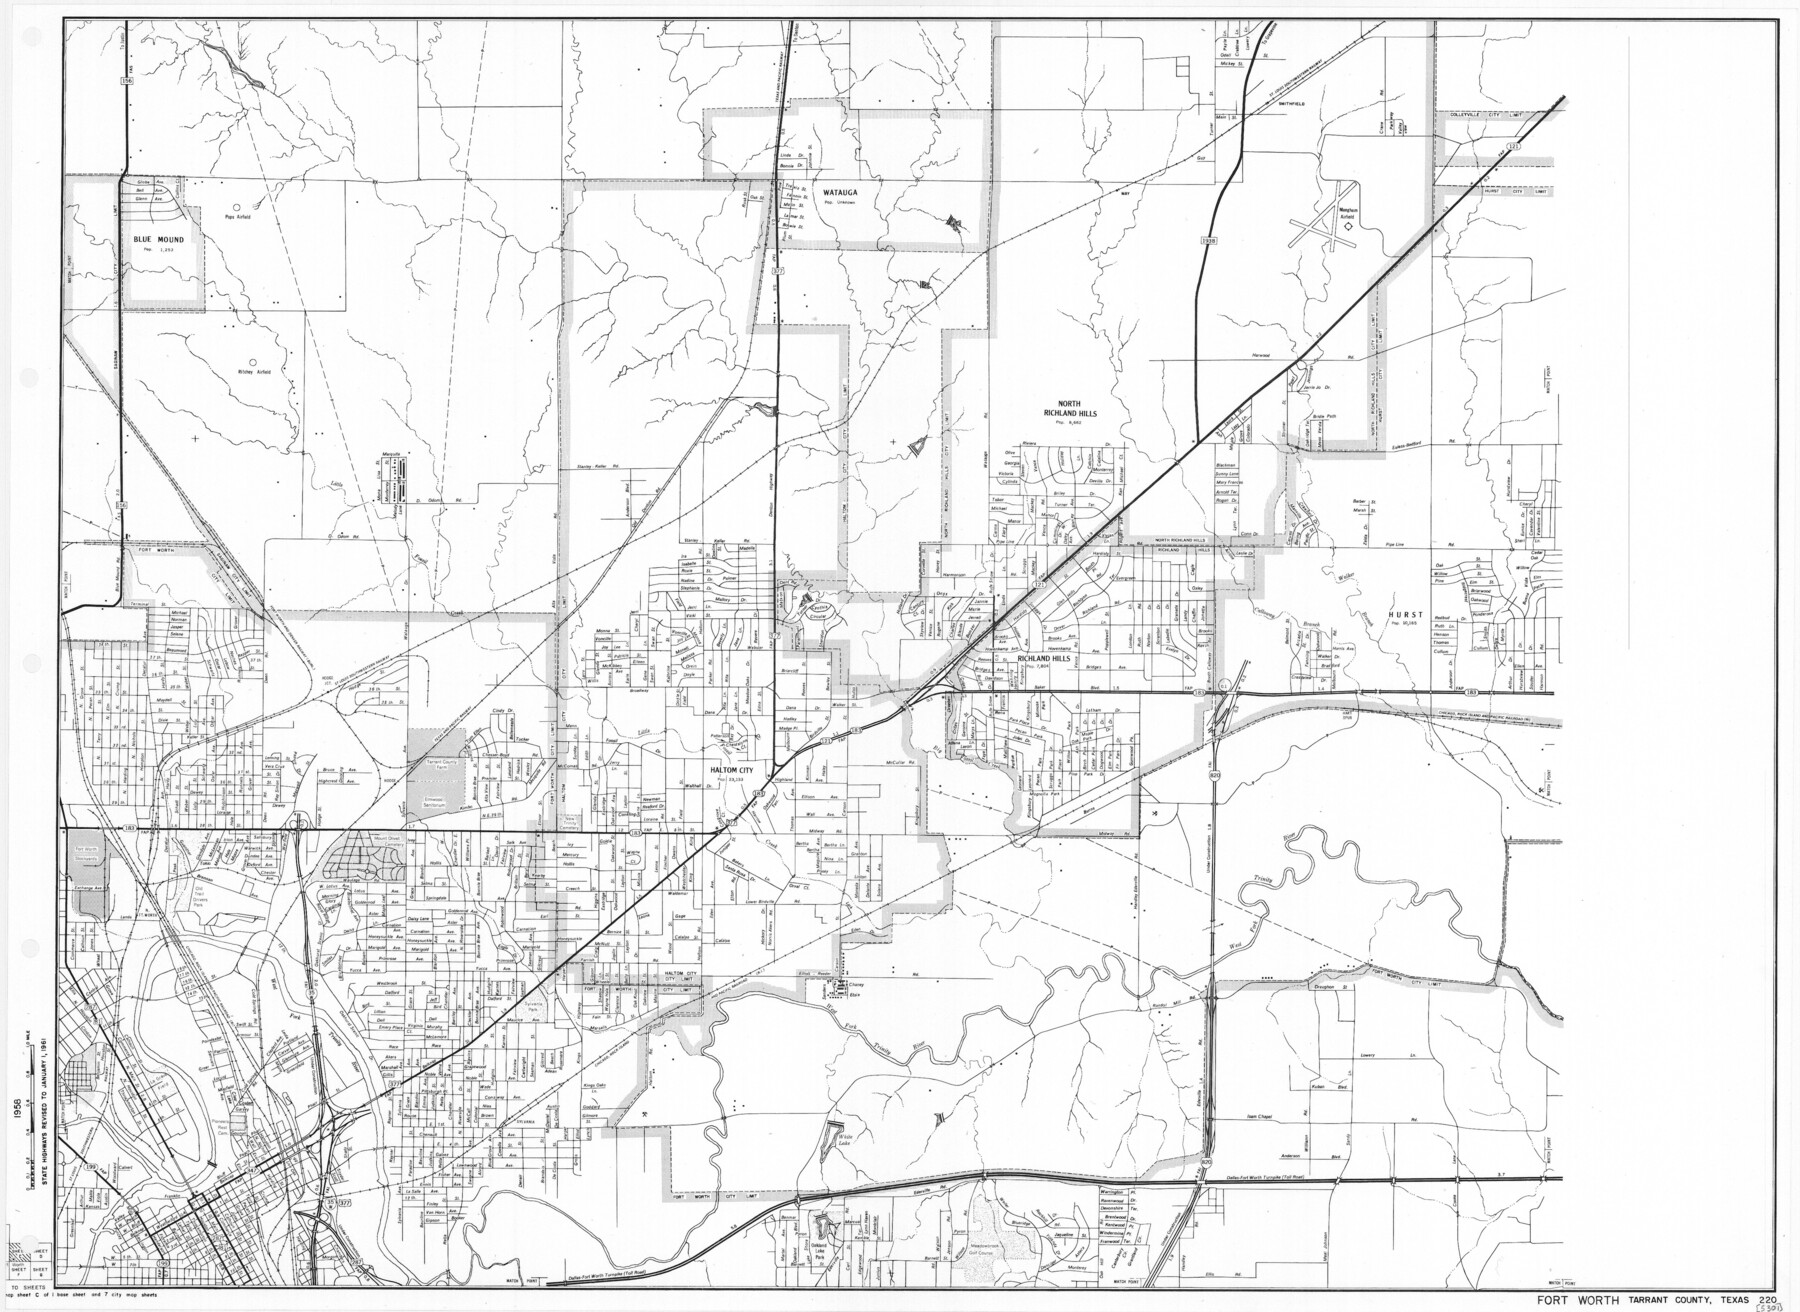 79667, General Highway Map.  Detail of Cities and Towns in Tarrant County, Texas.  City Map, Fort Worth and vicinity, Tarrant County, Texas, Texas State Library and Archives